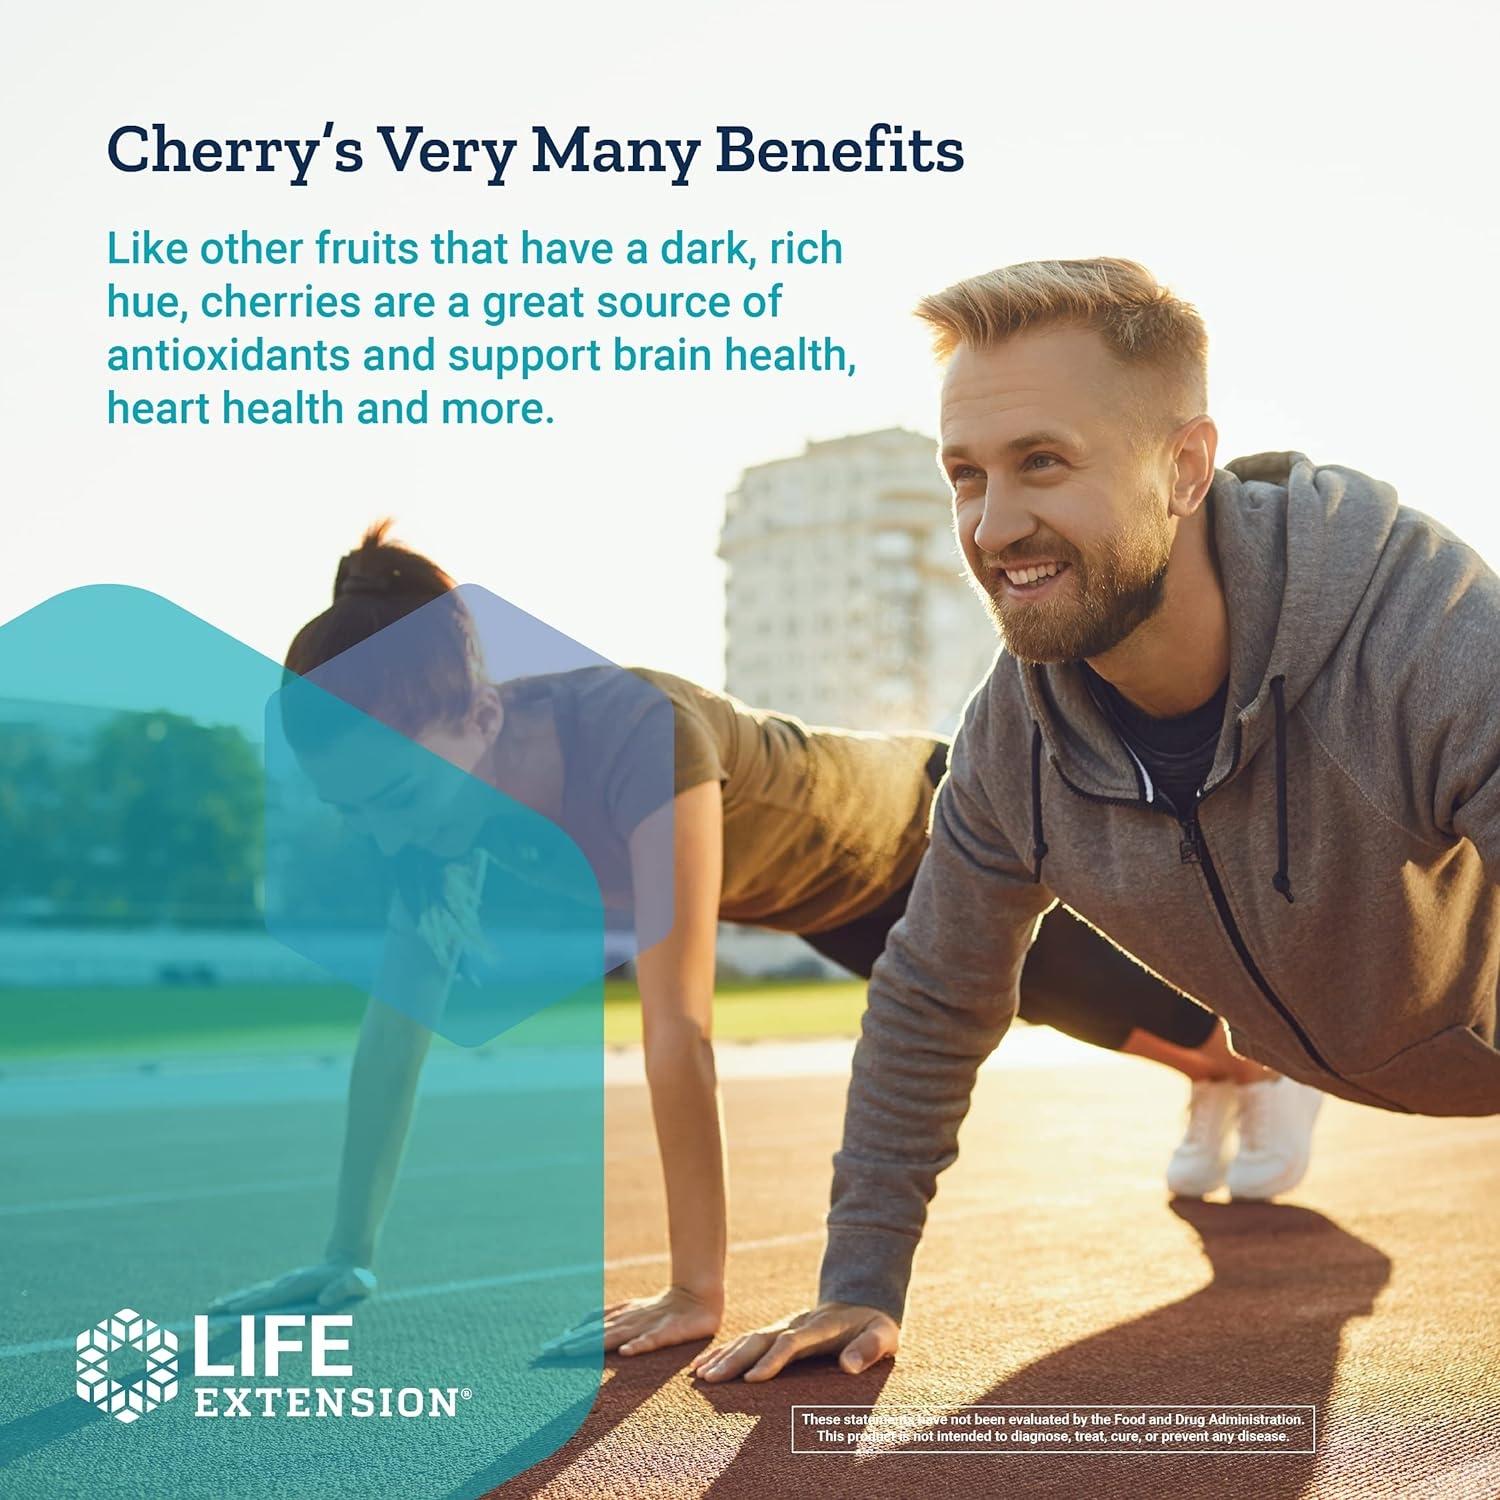 Life Extension Tart Extract with CherryPure 60 Vegetarian Capsules